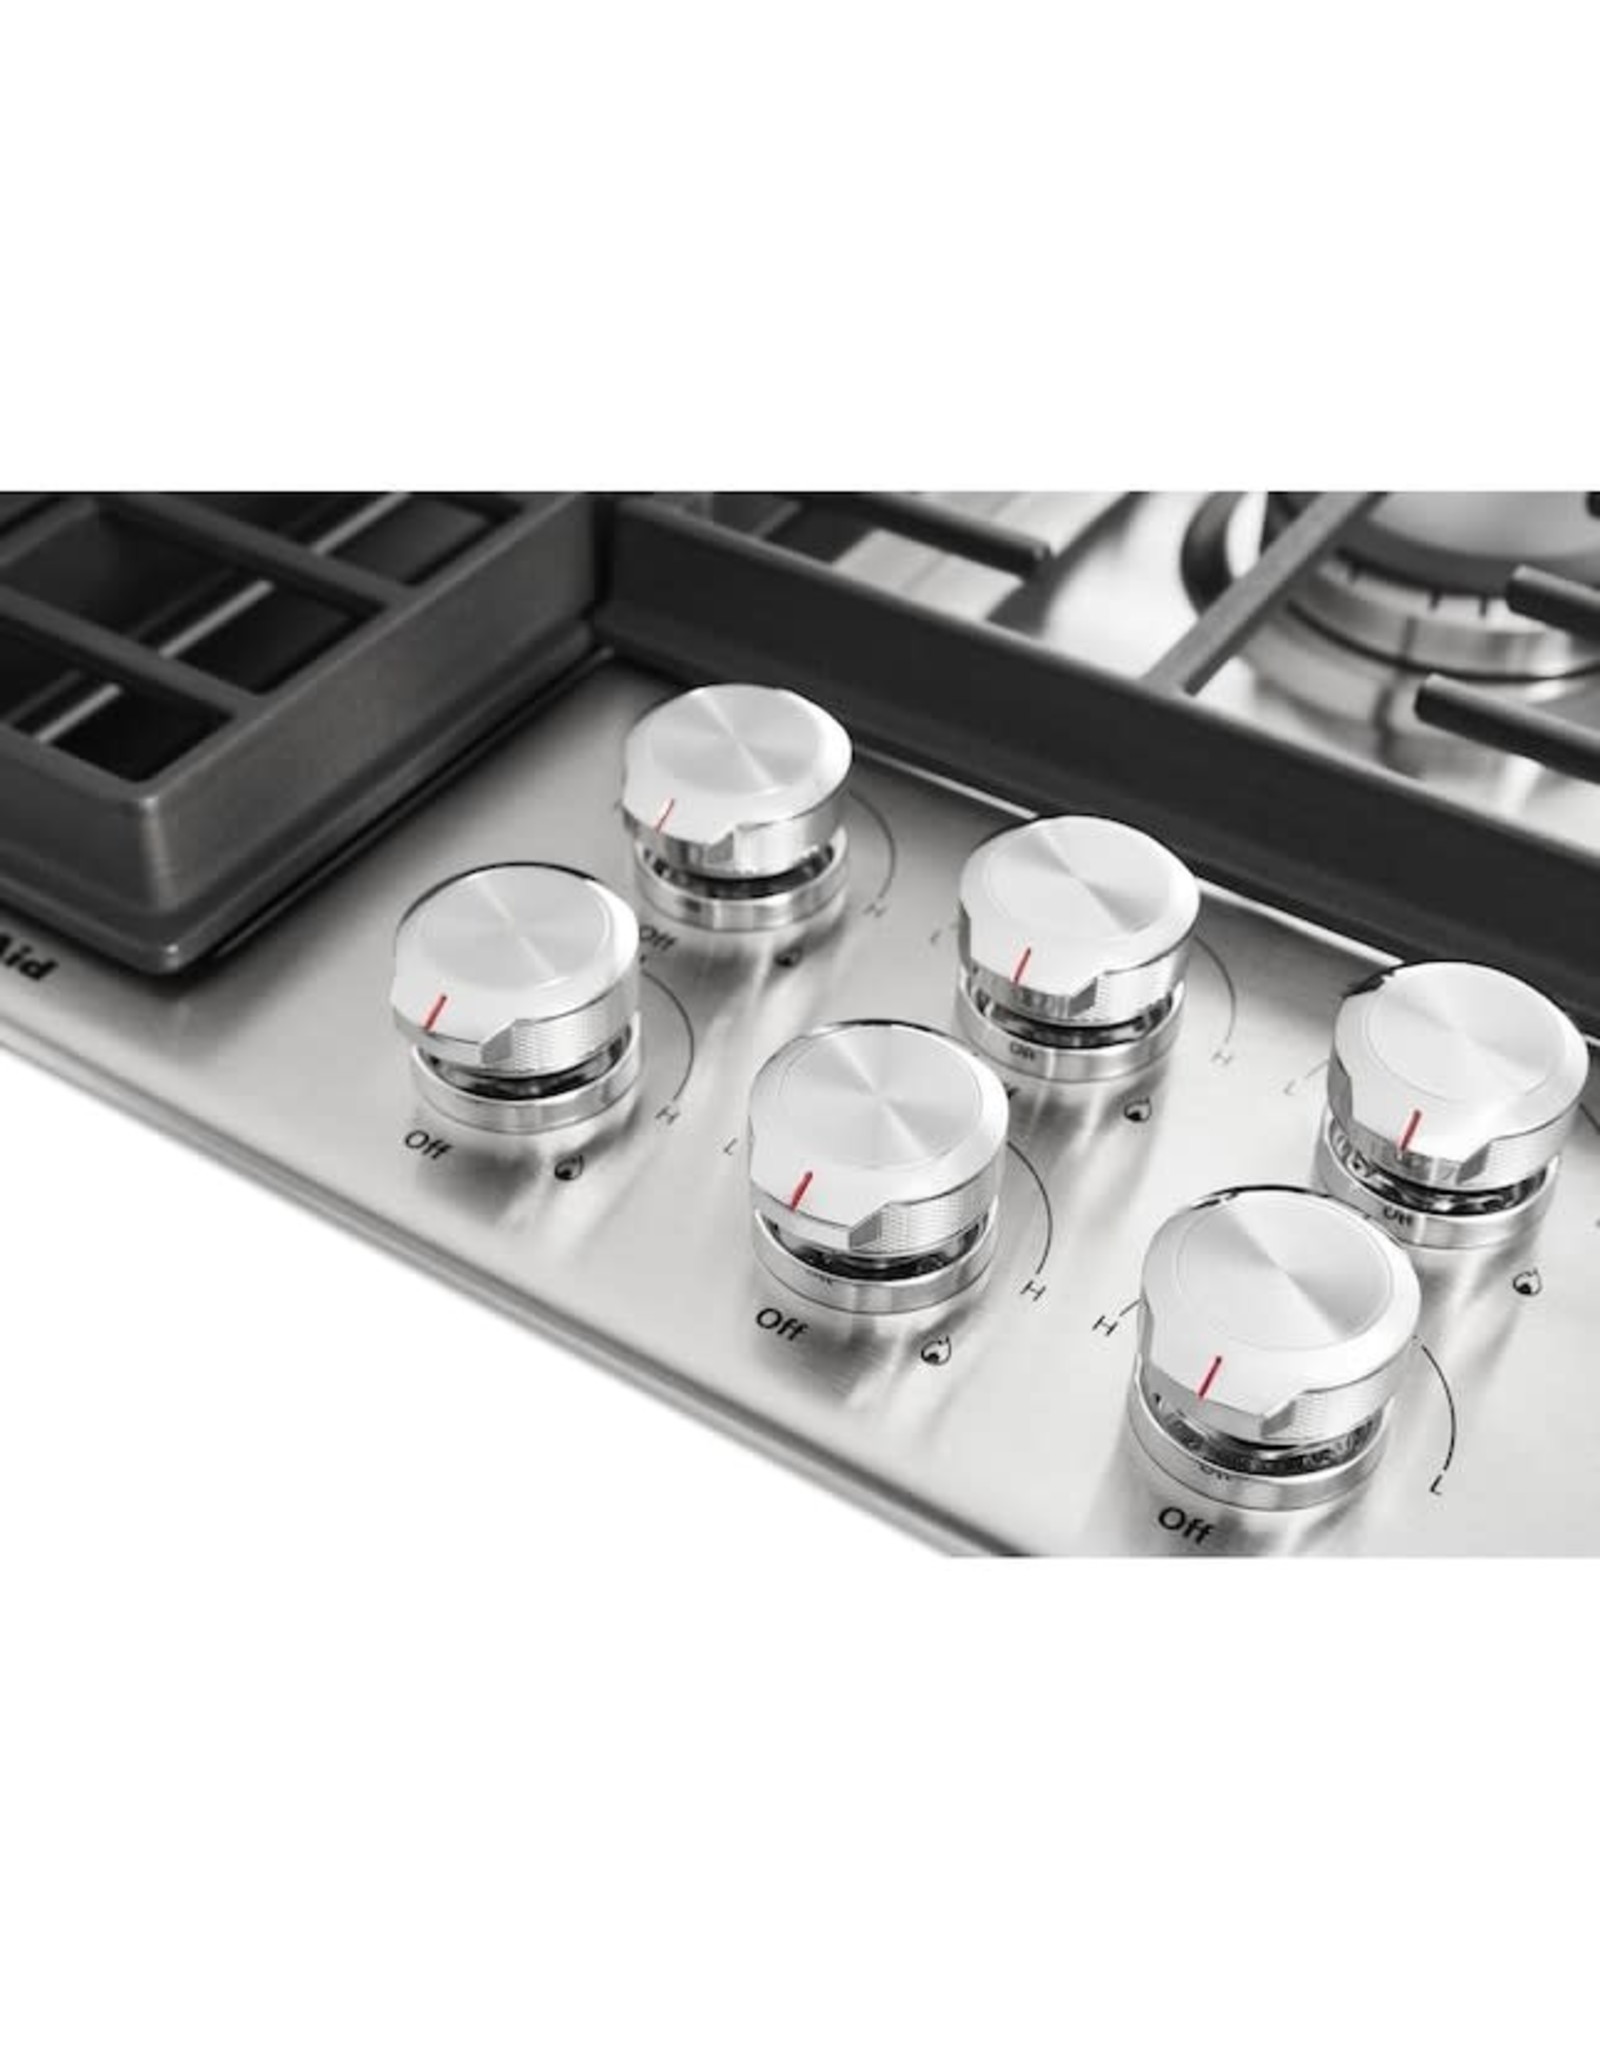 KCGD506GSS 36 in. Gas Downdraft Cooktop in Stainless Steel with 5 Burners